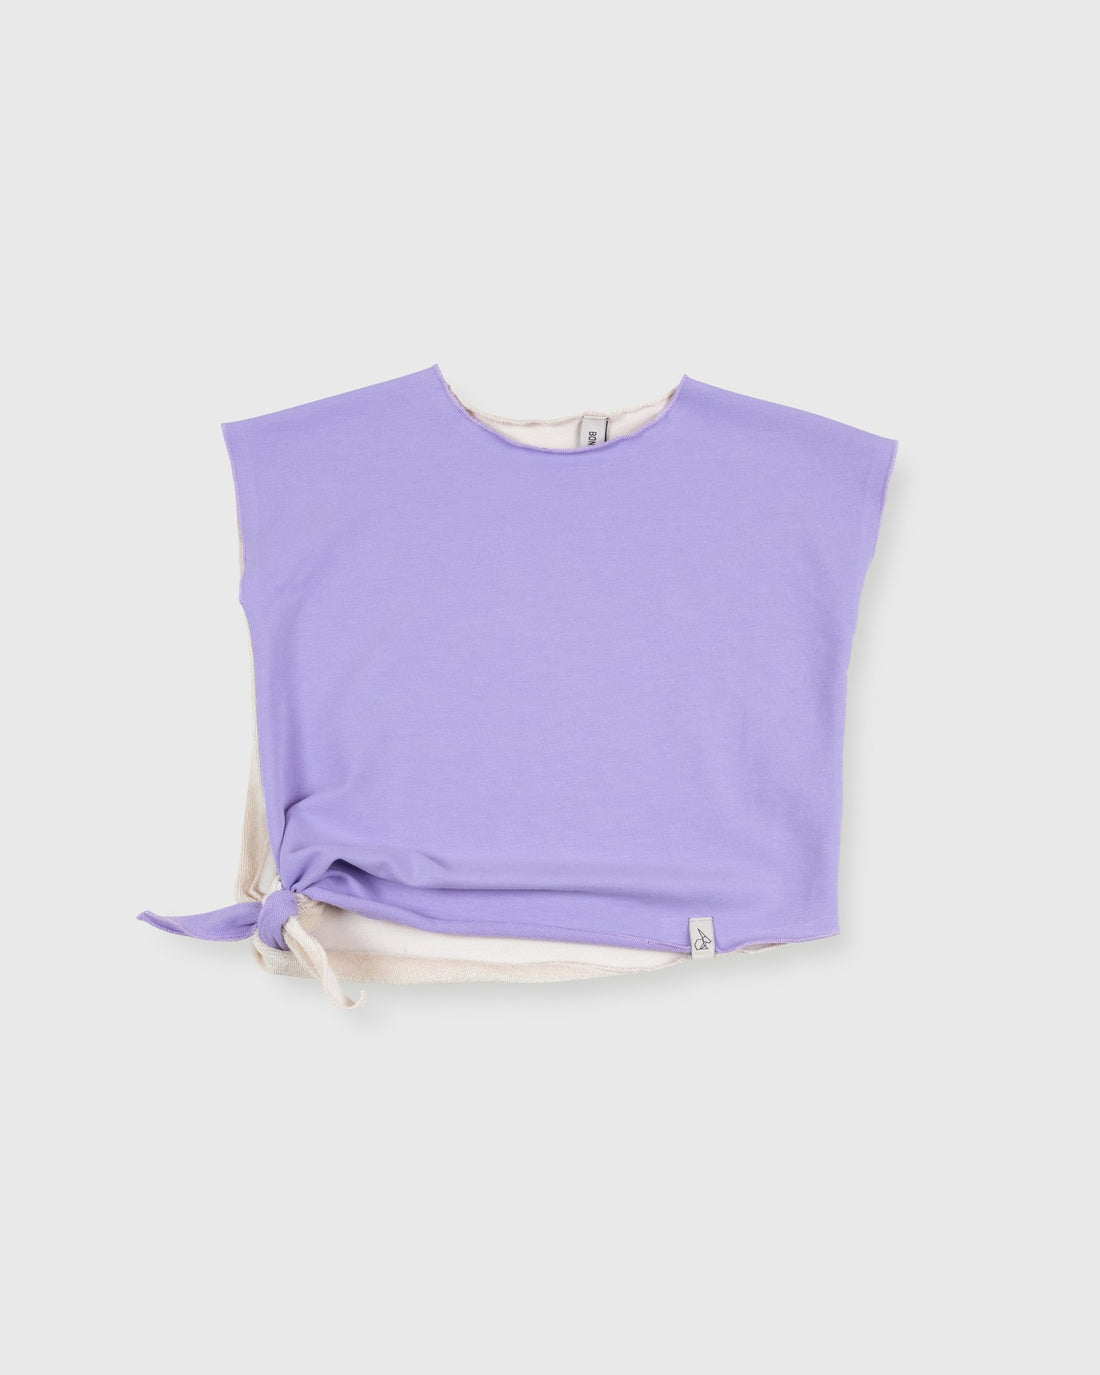 MILLIE knotted T-shirt